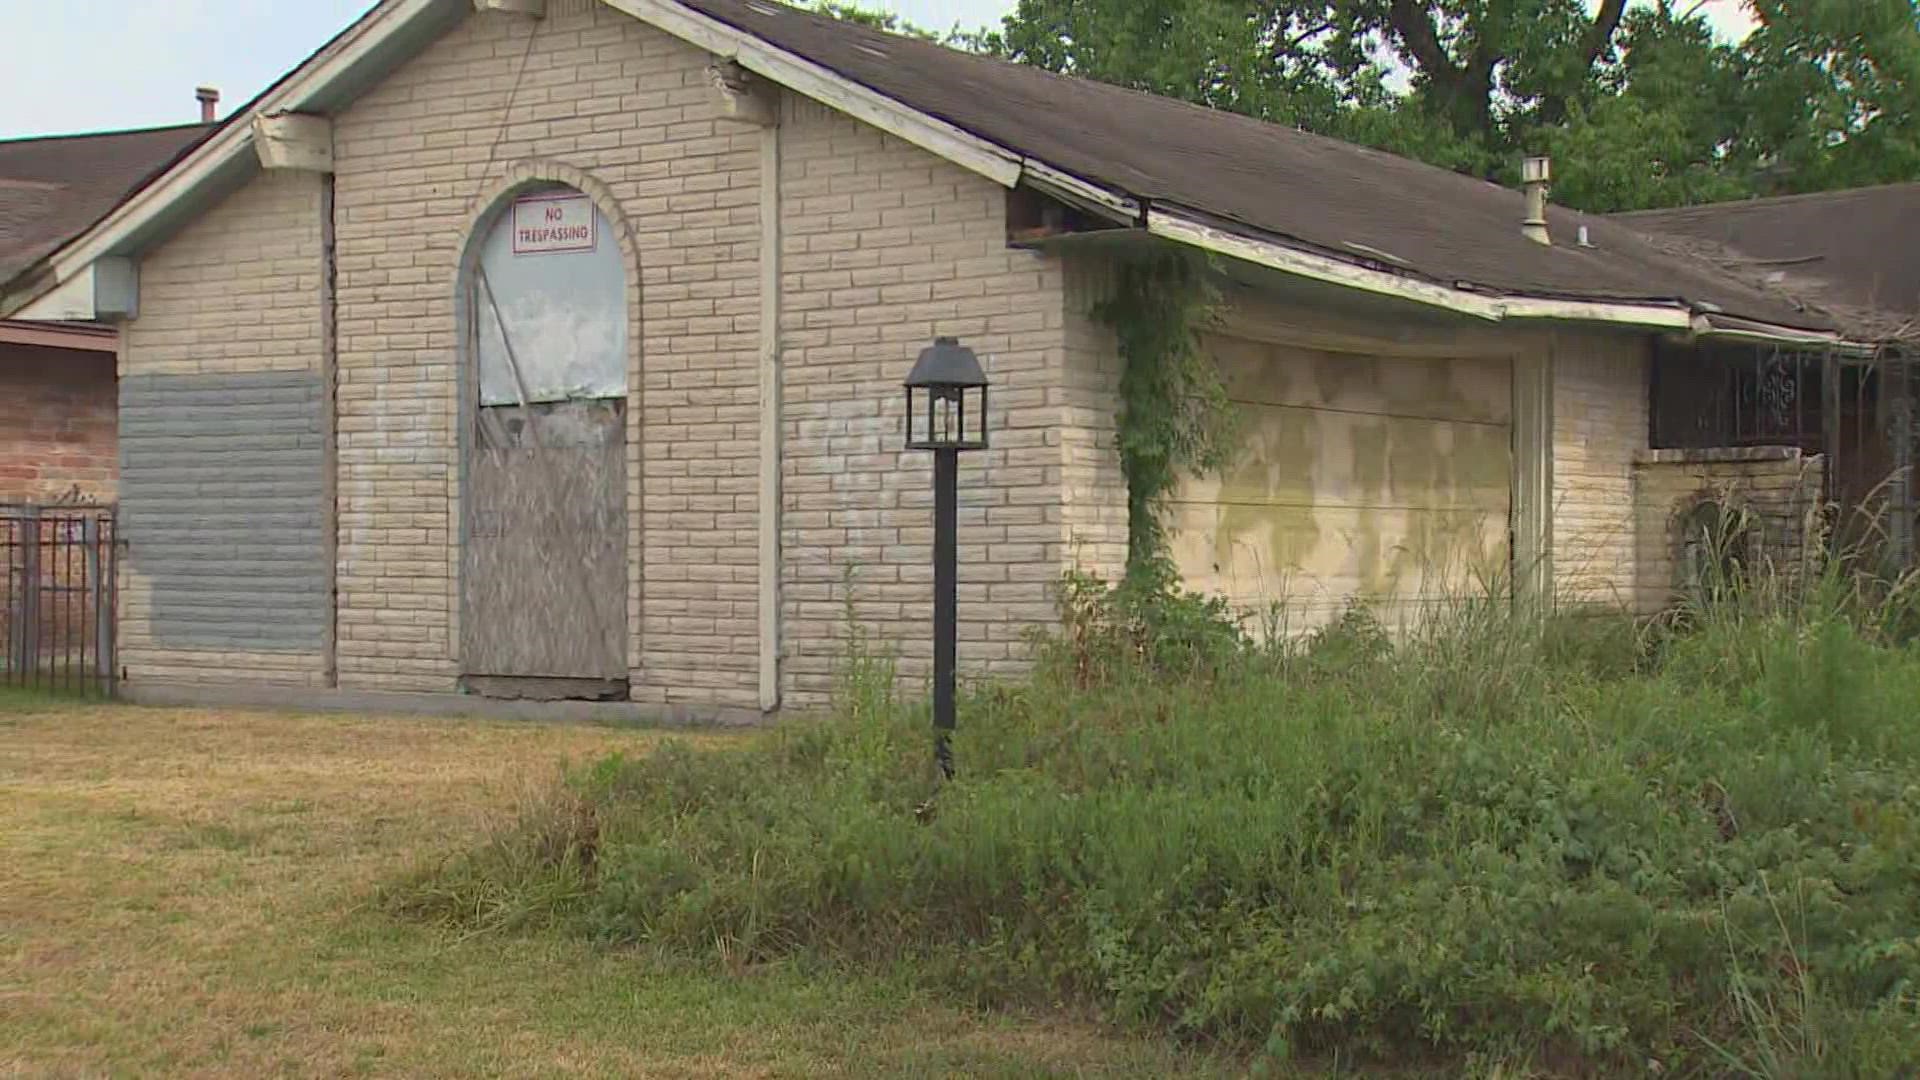 Harris County's Neighborhood Nuisance Abate program has received additional funding allowing them to clear out more homes considered eye sores.